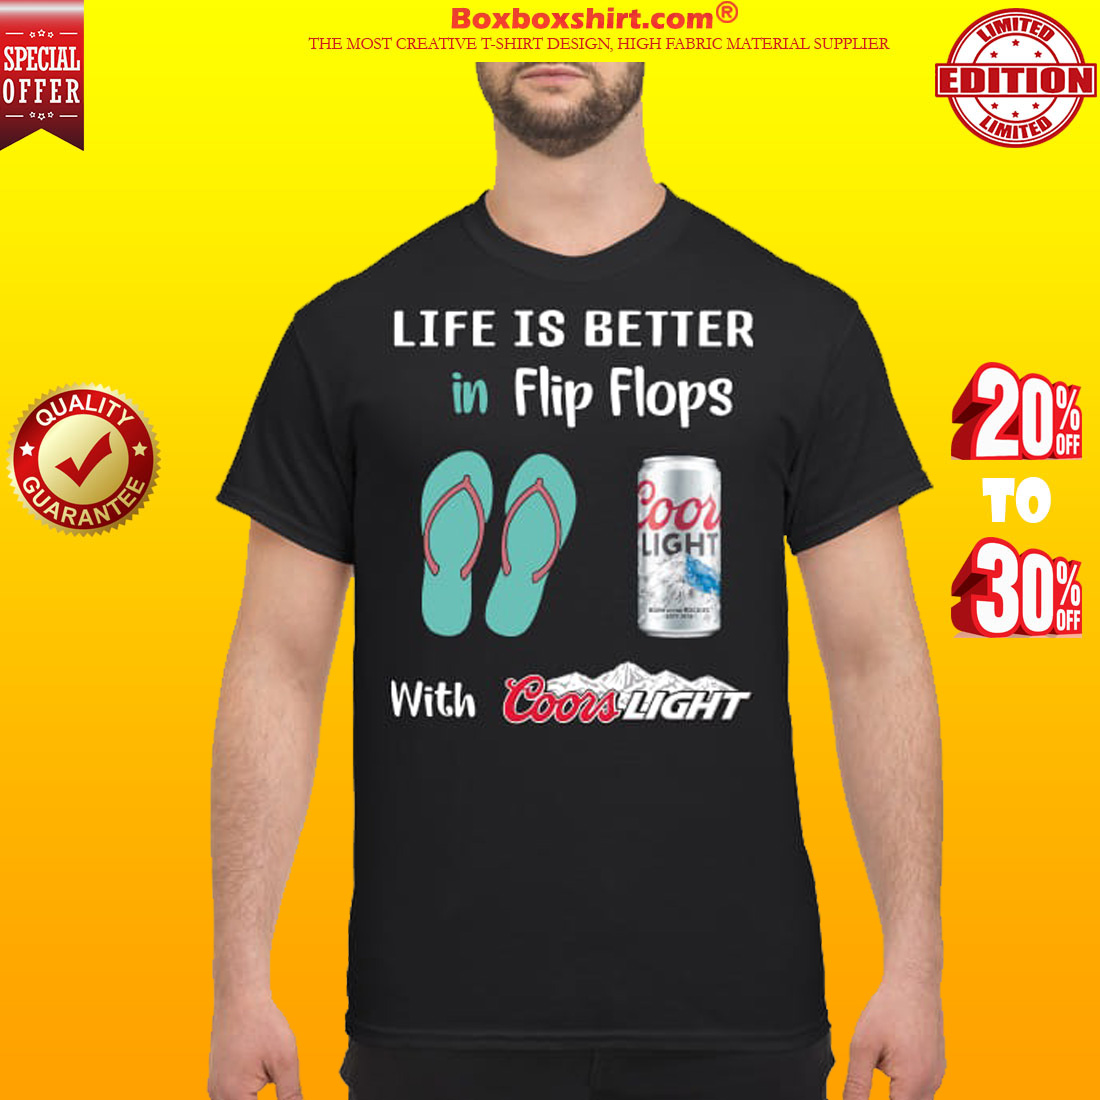 Life is better in flip flops with Coors light classic shirt